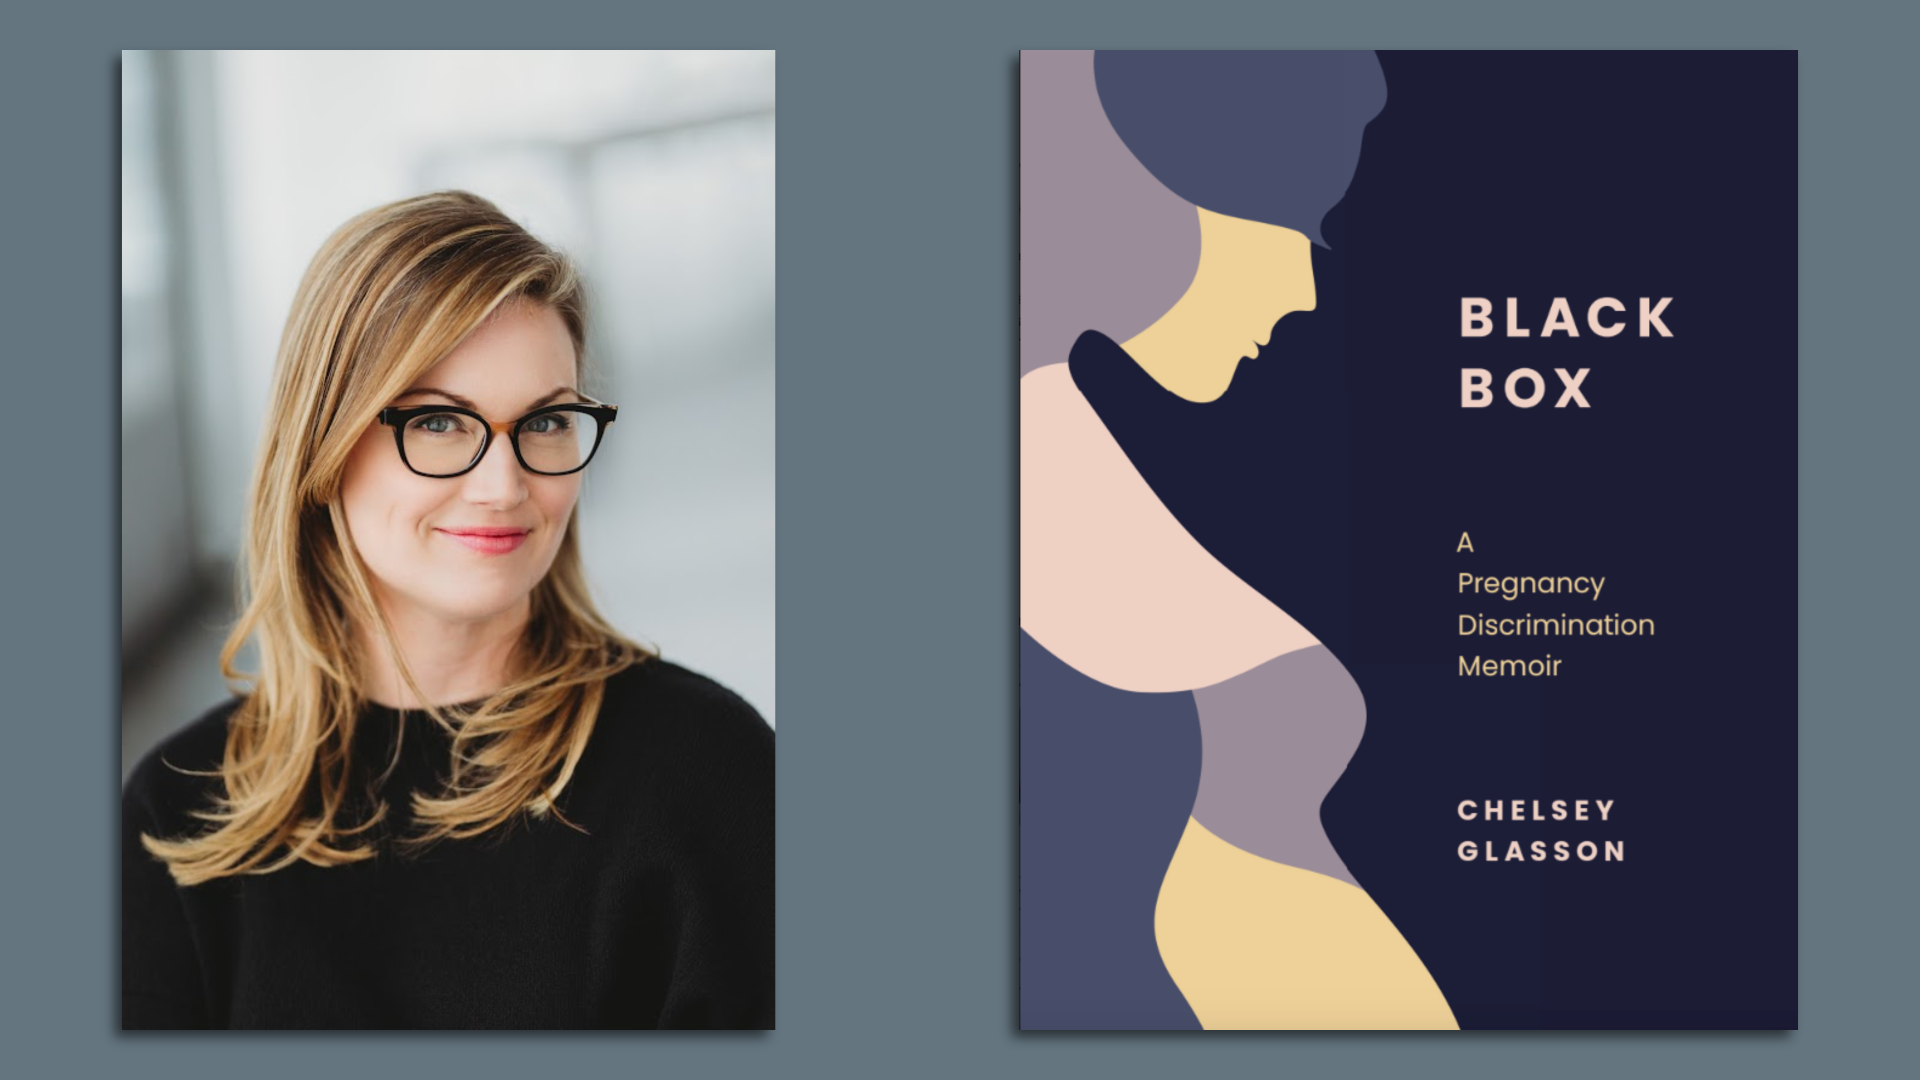 Split screen image of a woman and the cover of a book. 